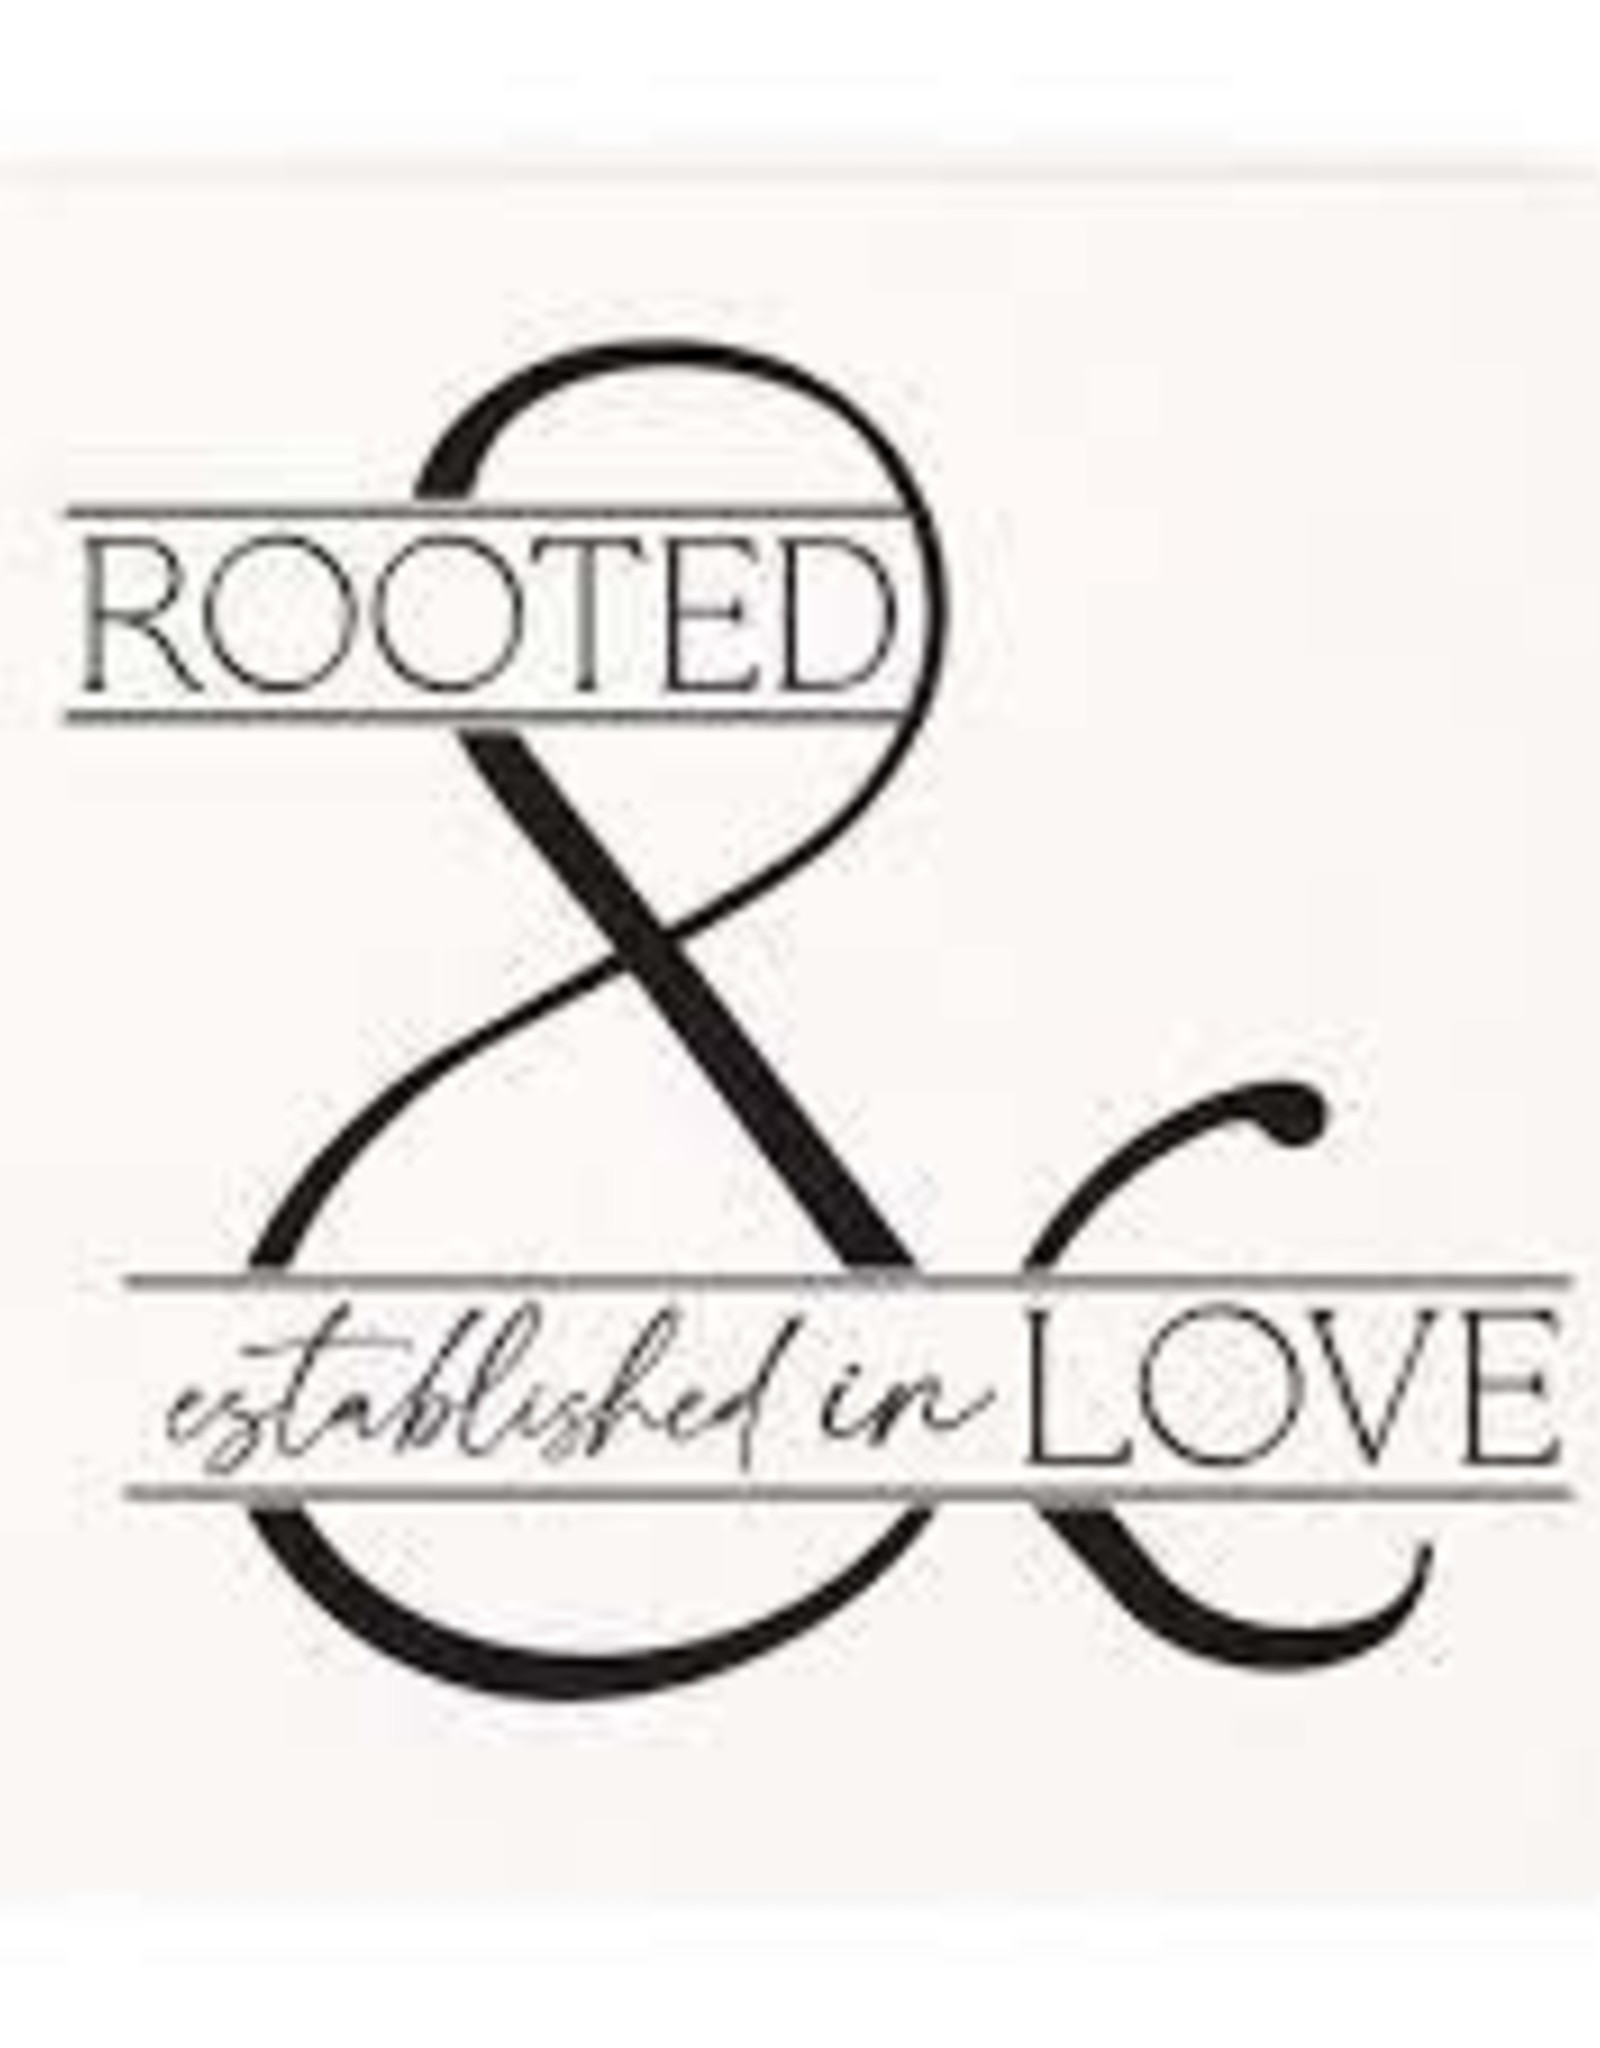 Home Goods P Graham - Rooted and Established in Love Coaster Large-4"